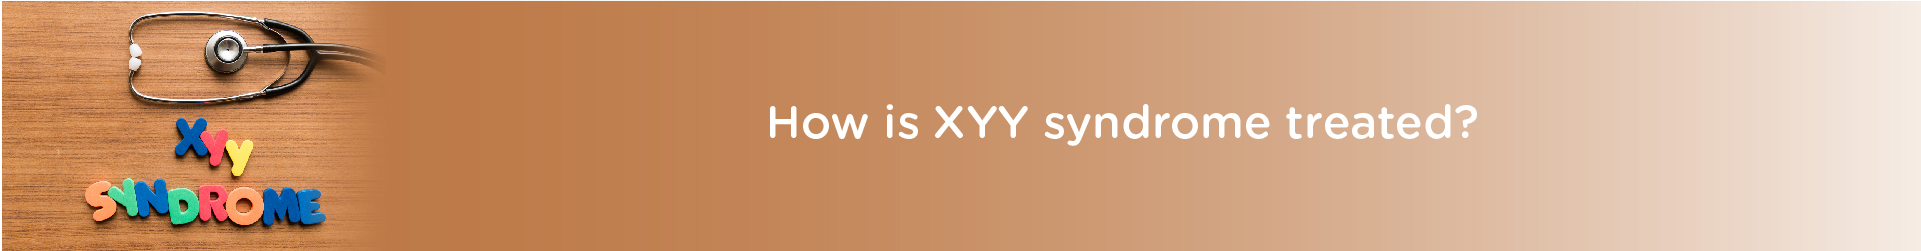 How is XYY Syndrome Treated?